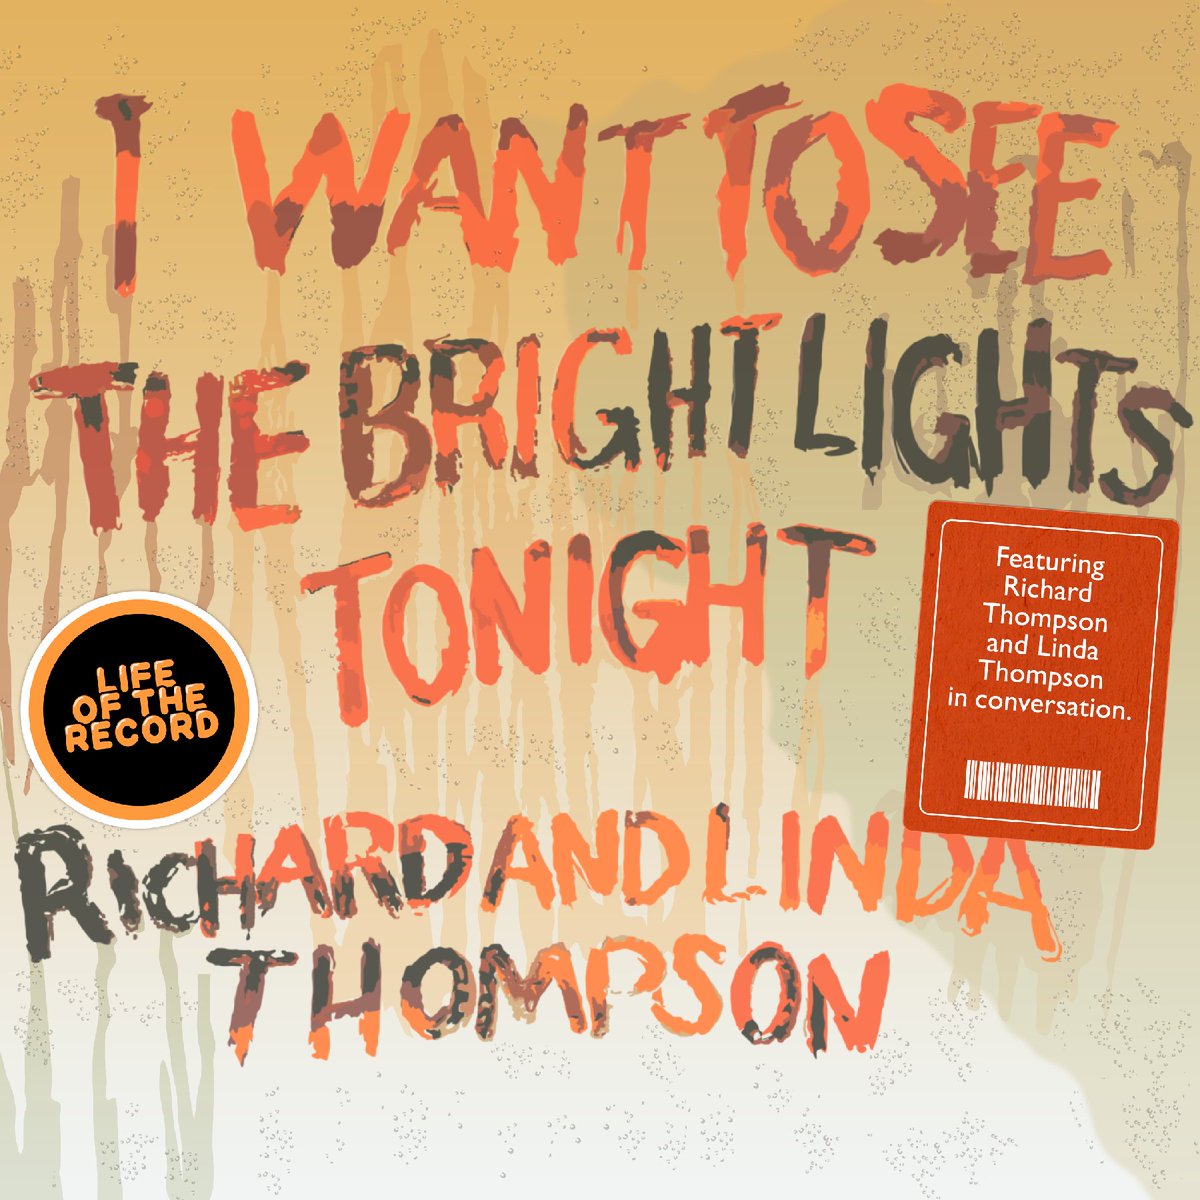 For the 50th anniversary of I WANT TO SEE THE BRIGHT LIGHTS TONIGHT, we spoke to Richard Thompson and Linda Thompson about how it was made. Leaving Fairport, becoming a duo, recording cheaply and a shared love of bleak songs in the folk tradition. Listen: lifeoftherecord.com/#/richard-lind…